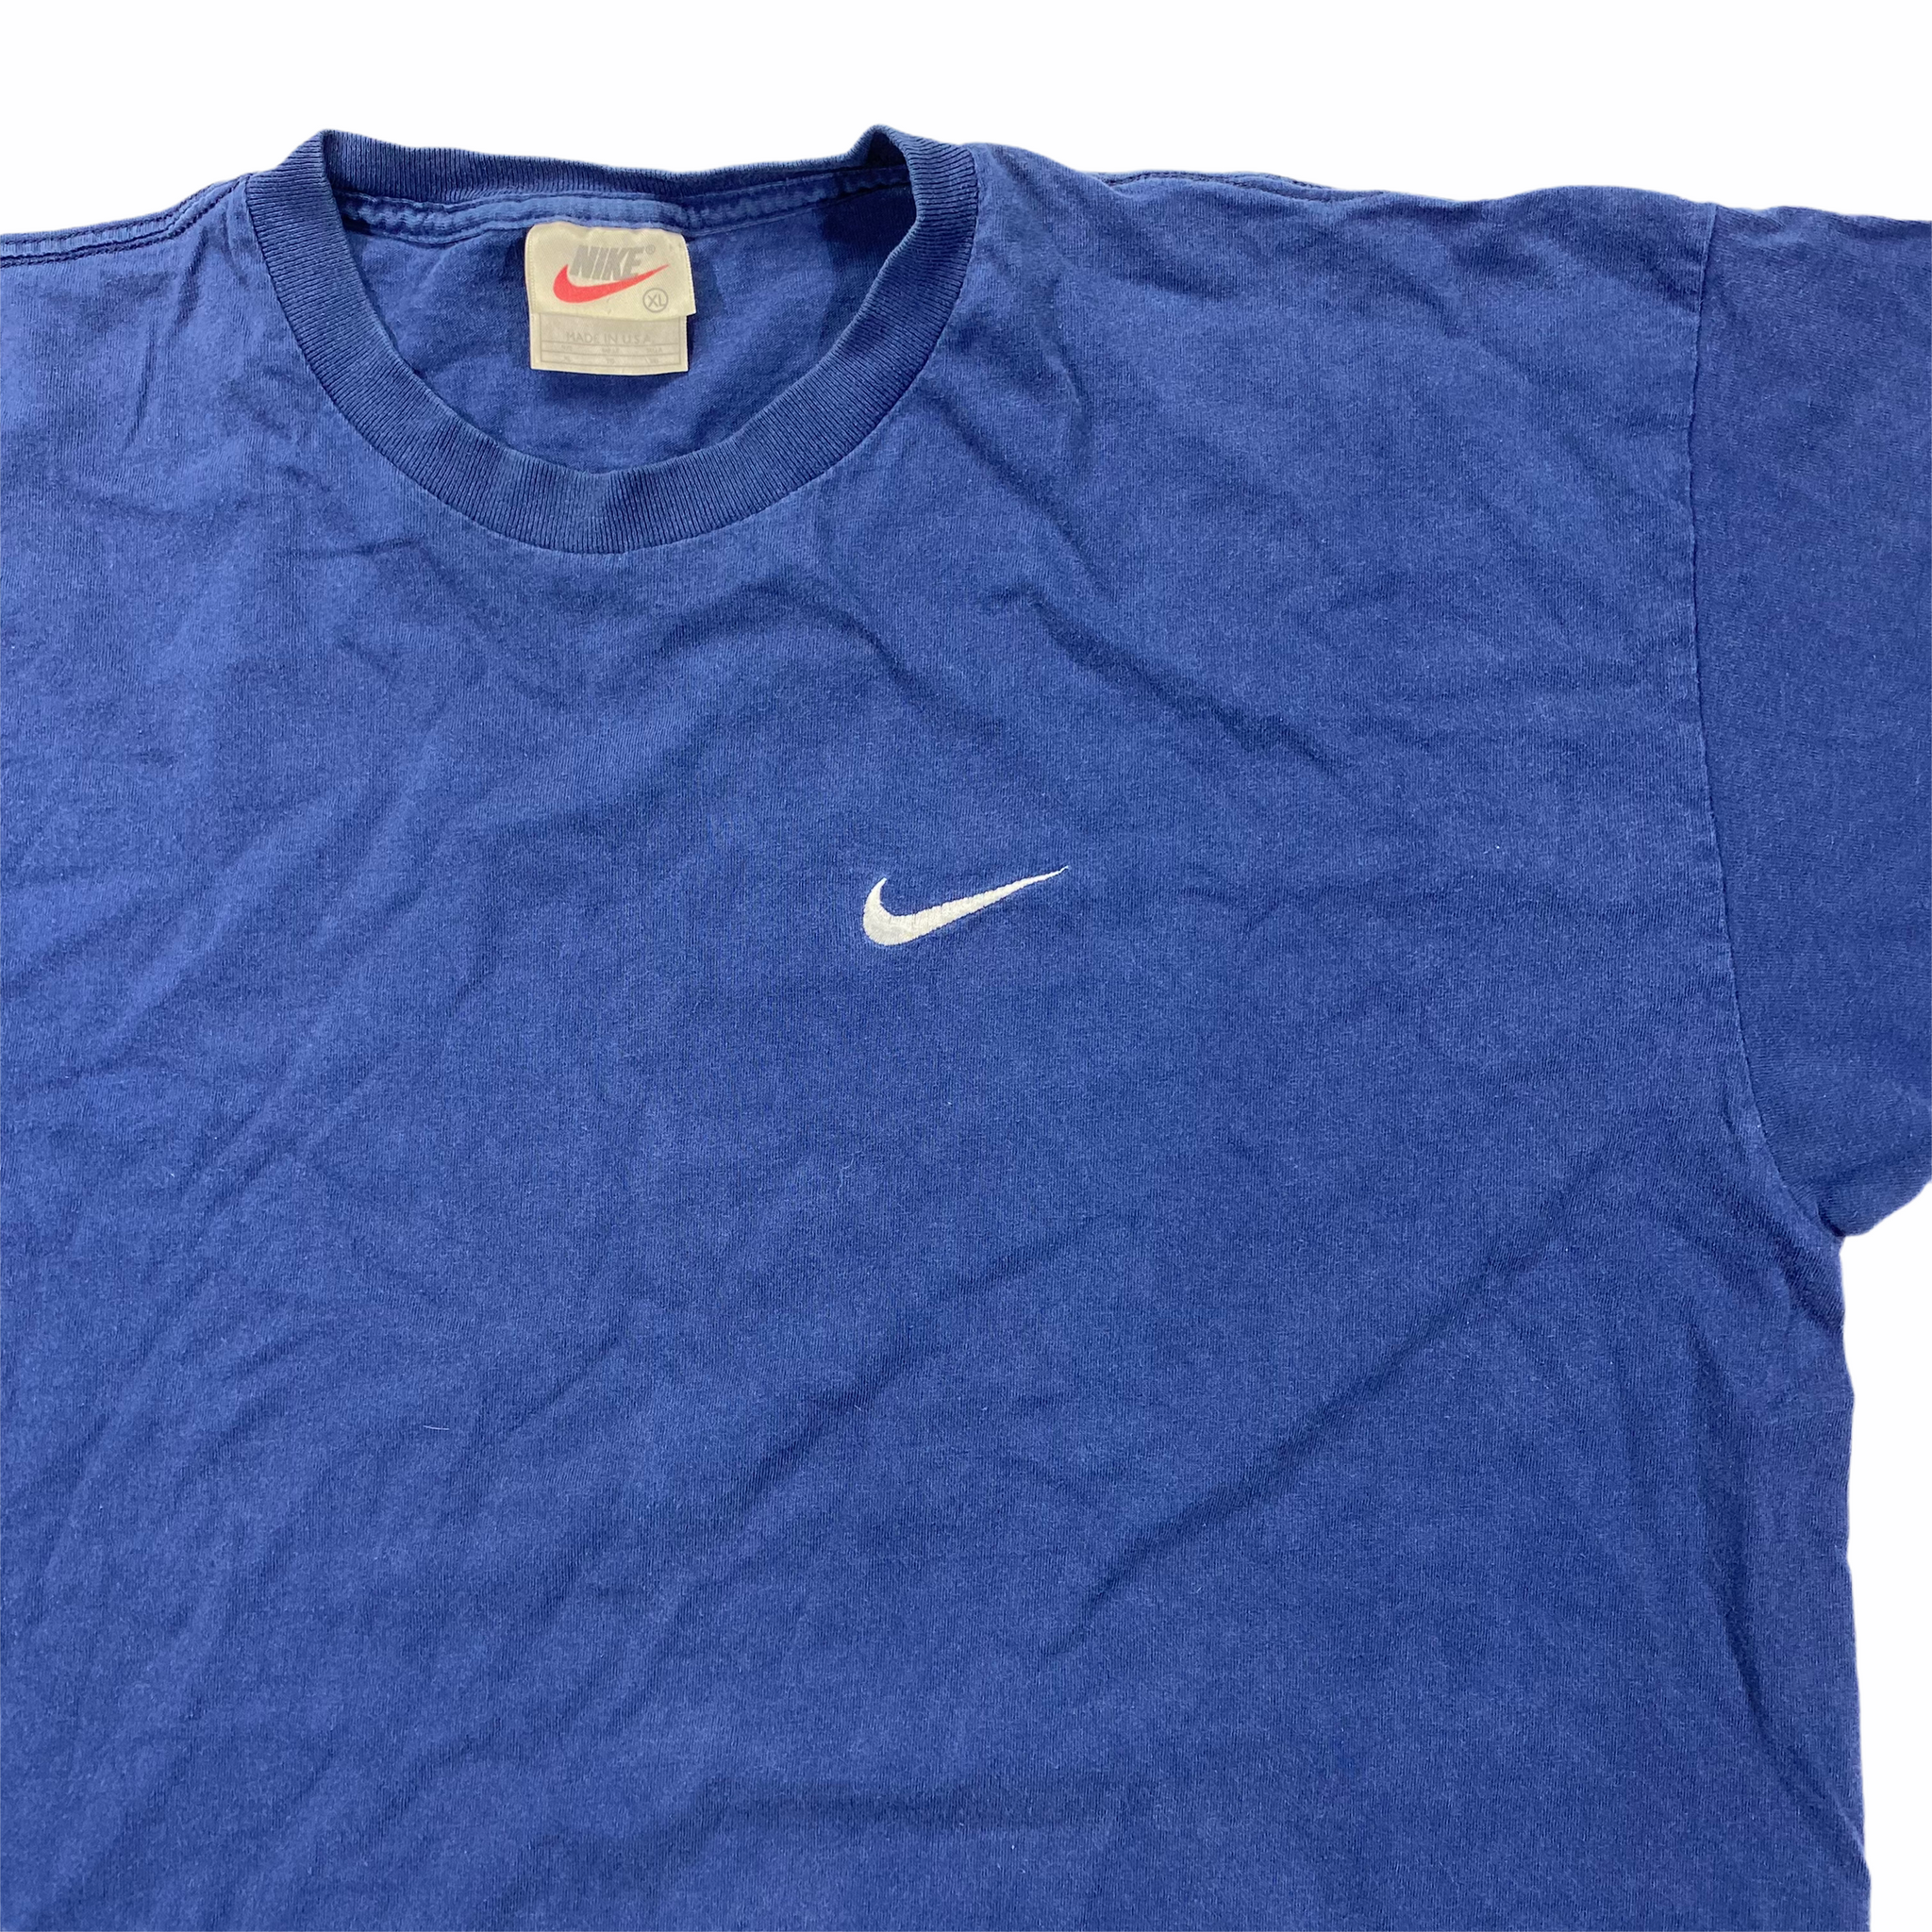 Nike tiny check tee. Made in usa🇺🇸 XL